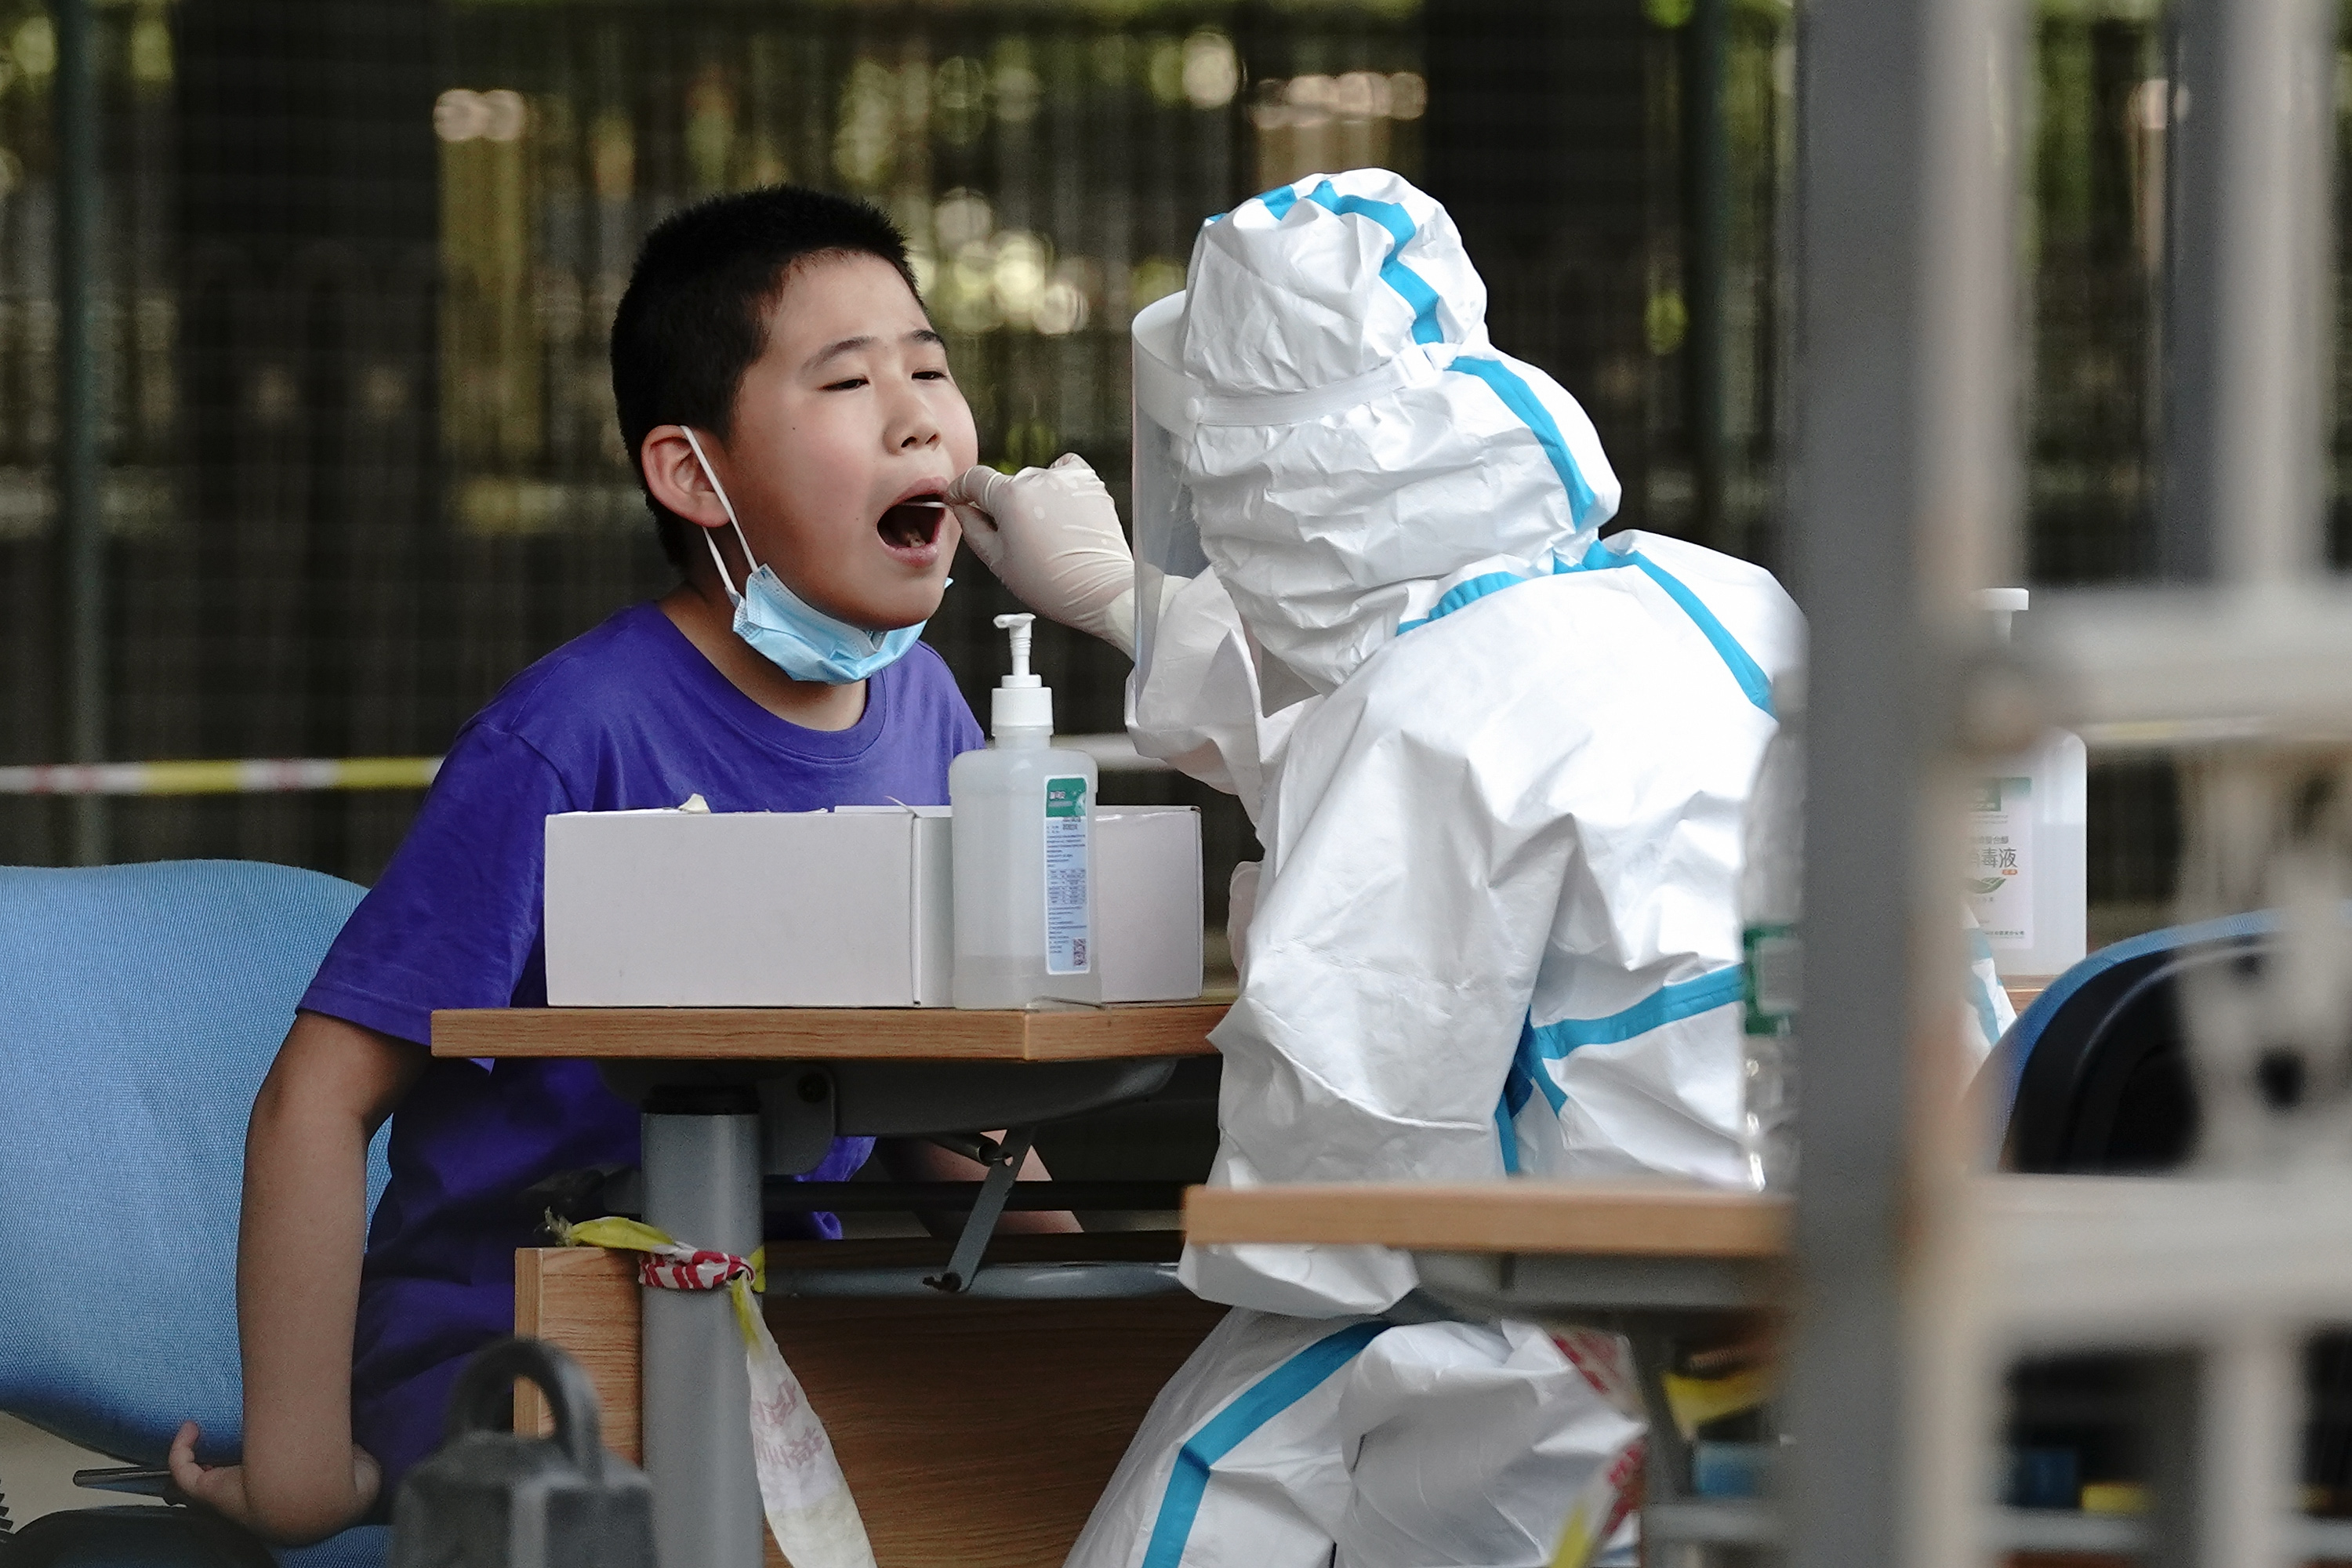 A medical worker wearing a protective suit takes a swap at a temporary COVID-19 testing site on June 30, 2020 in Beijing, China. (Lintao Zhang/Getty Images)